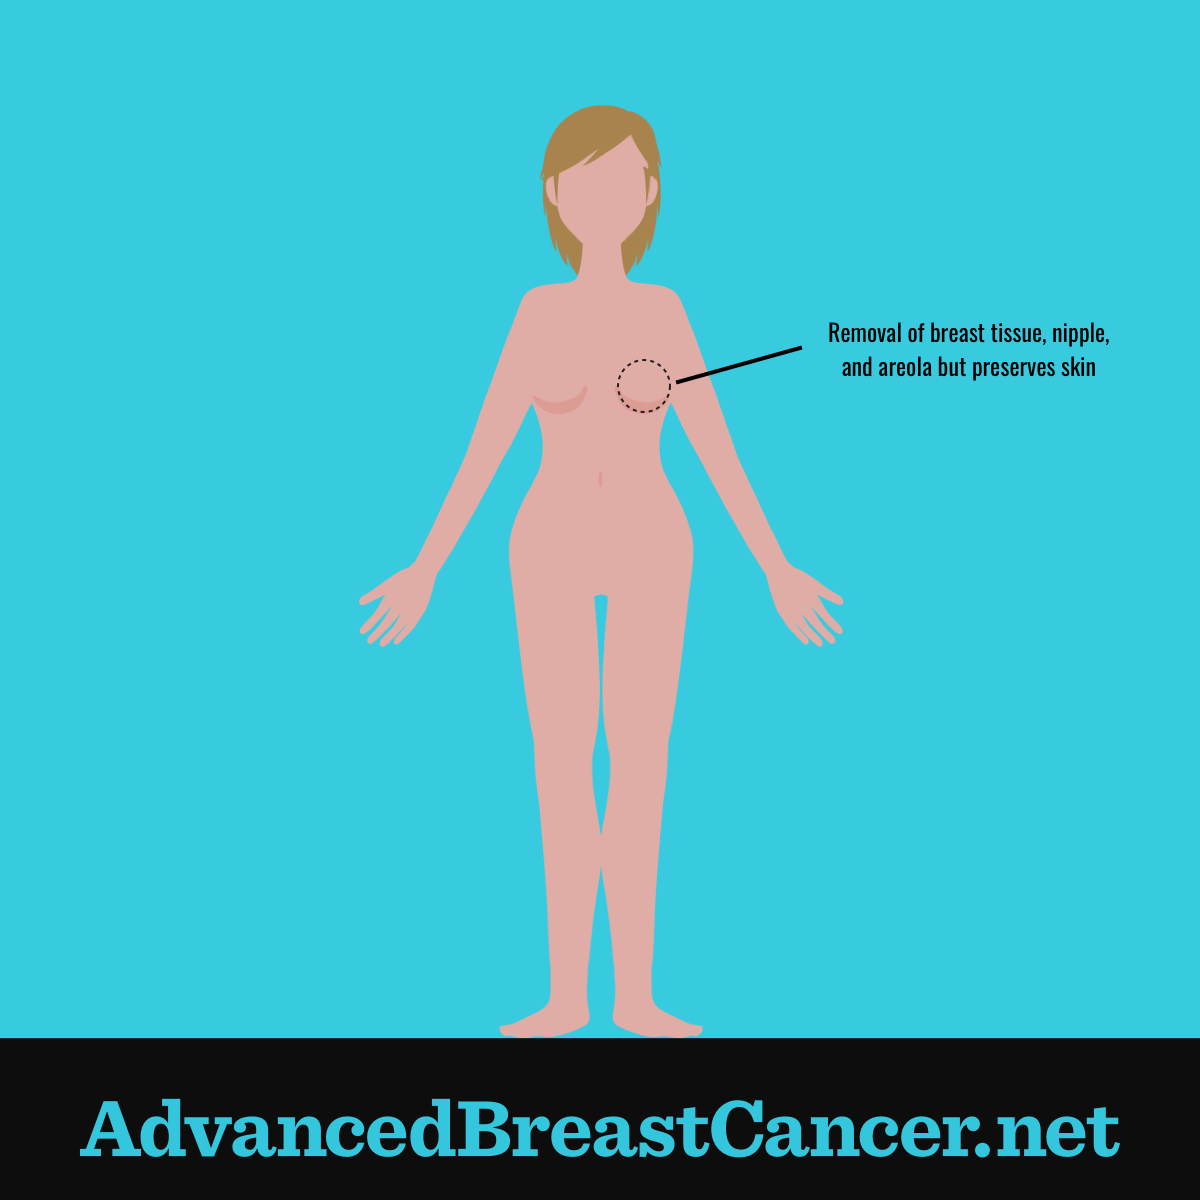 Human figure showing the right breast tissue, nipple and areola have been removed while the breast skin has been preserved.